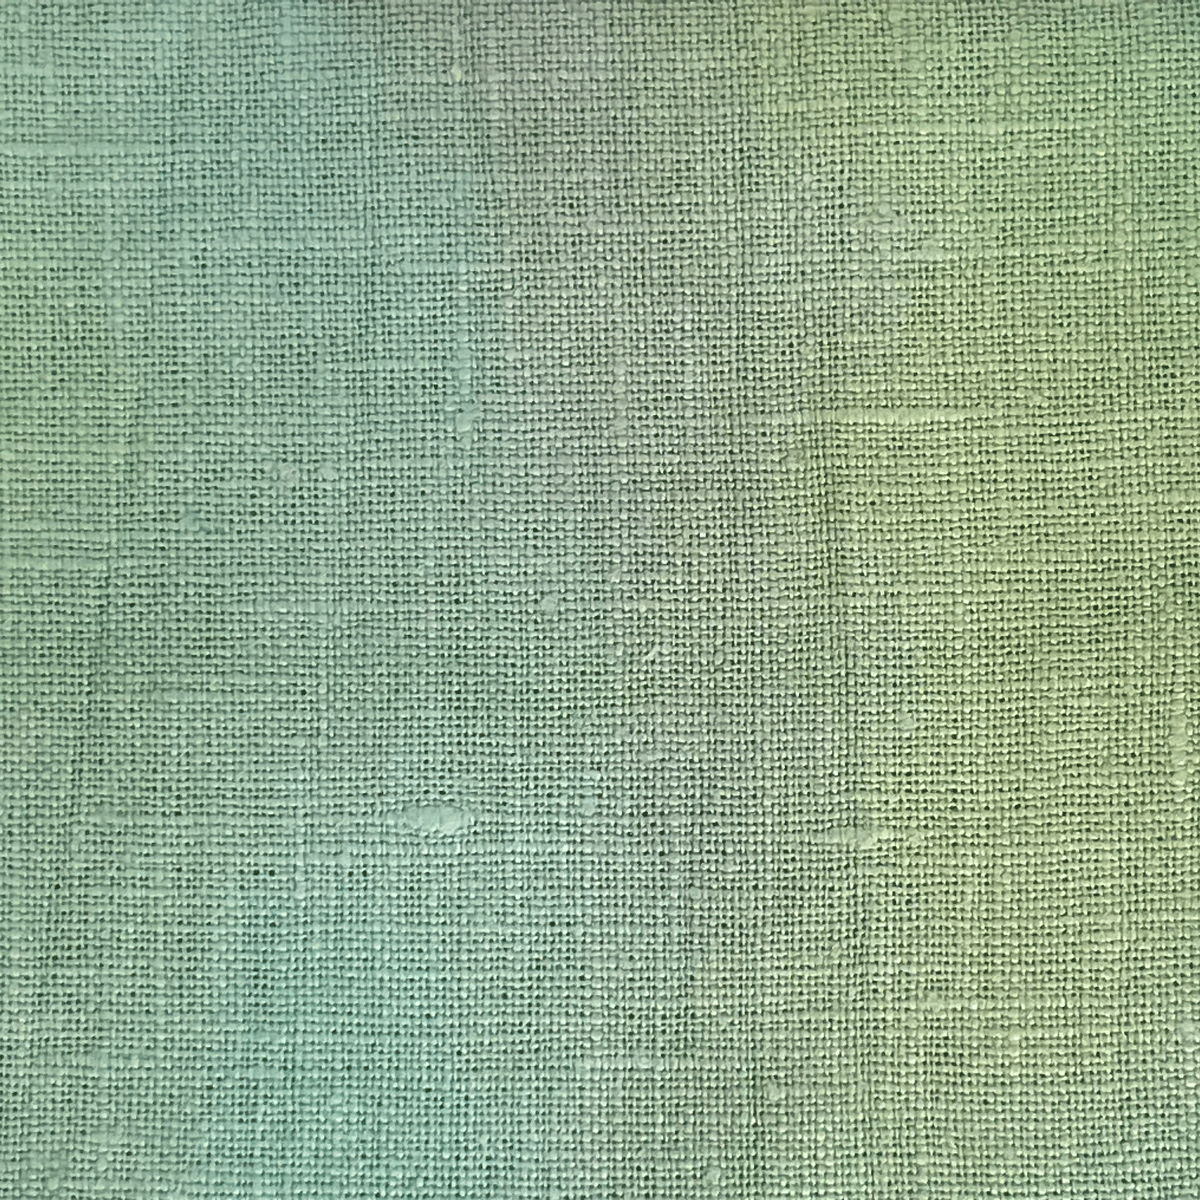 www.colourstreams.com.au Colour Streams Linen 36 Count Hand Dyed DL 11 Meadow Greens Embroidery Cross Stitch Textile Arts Fibre Embroidery Slow Stitching Counted Meditative Australia